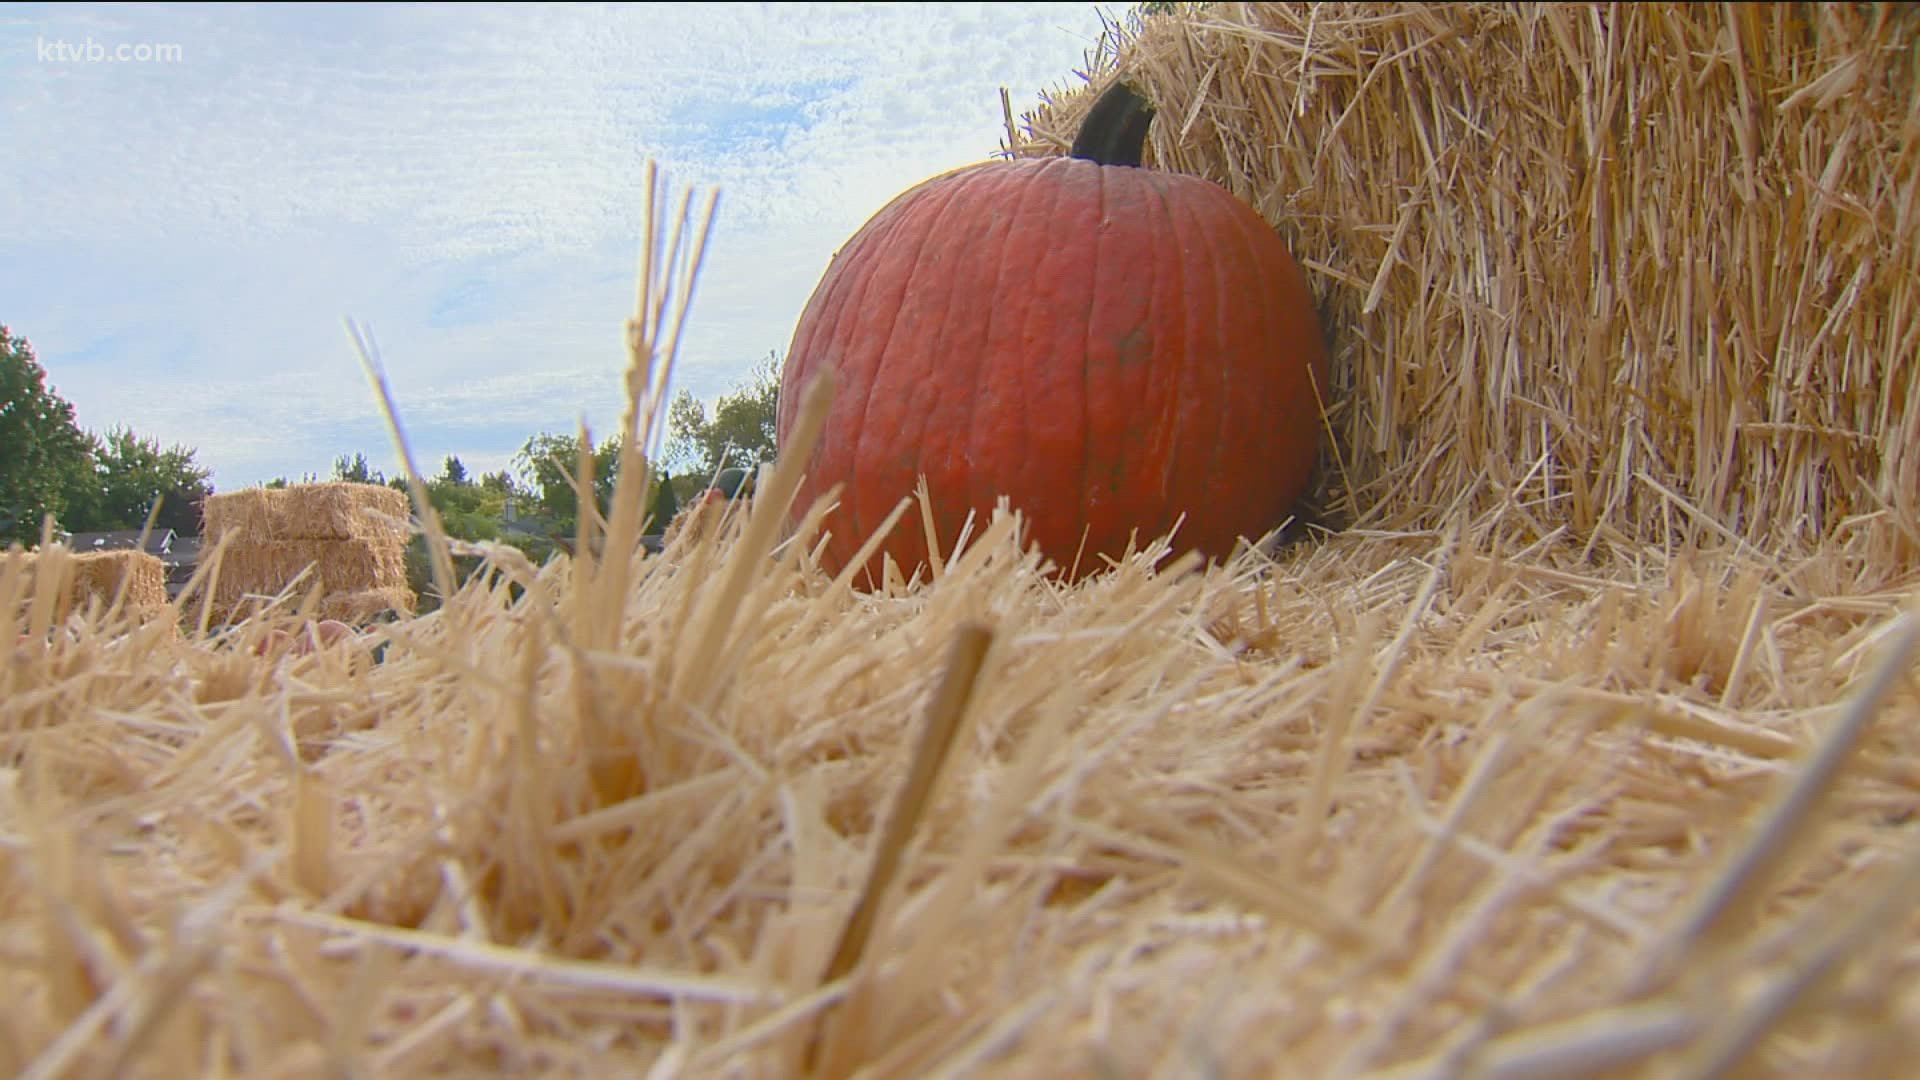 Jim Duthie heads to the Boise Urban Garden School to learn more about pumpkins.